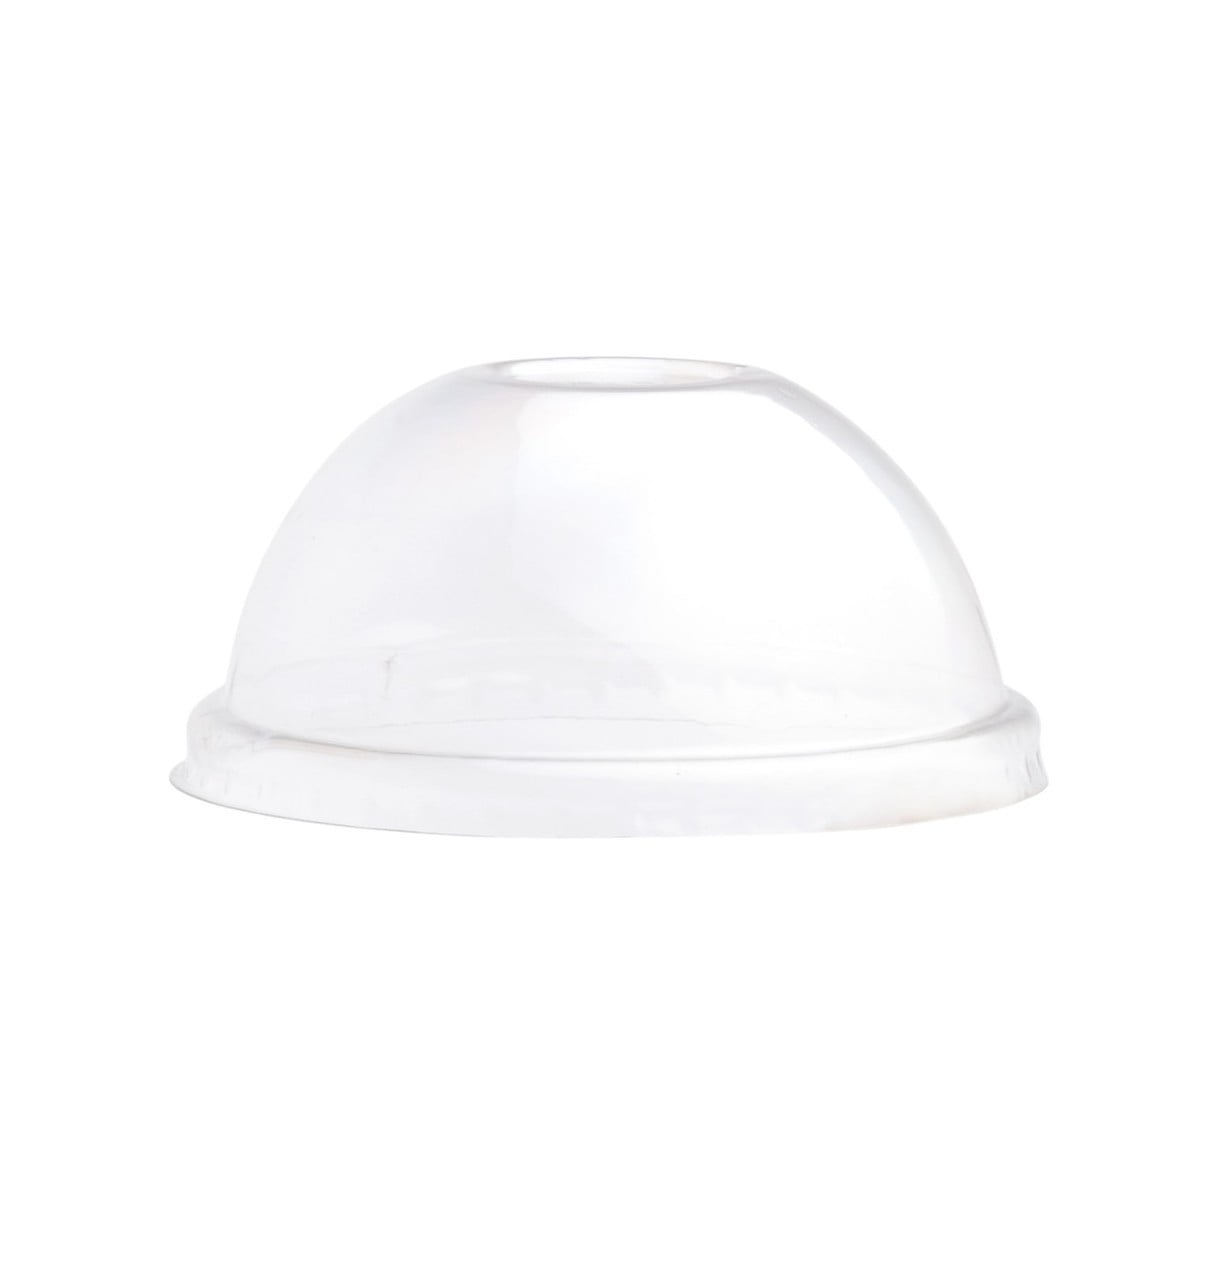 Coppetta Round White Paper To Go Cup Lid - Fits 5 oz - 3 1/2 x 3 1